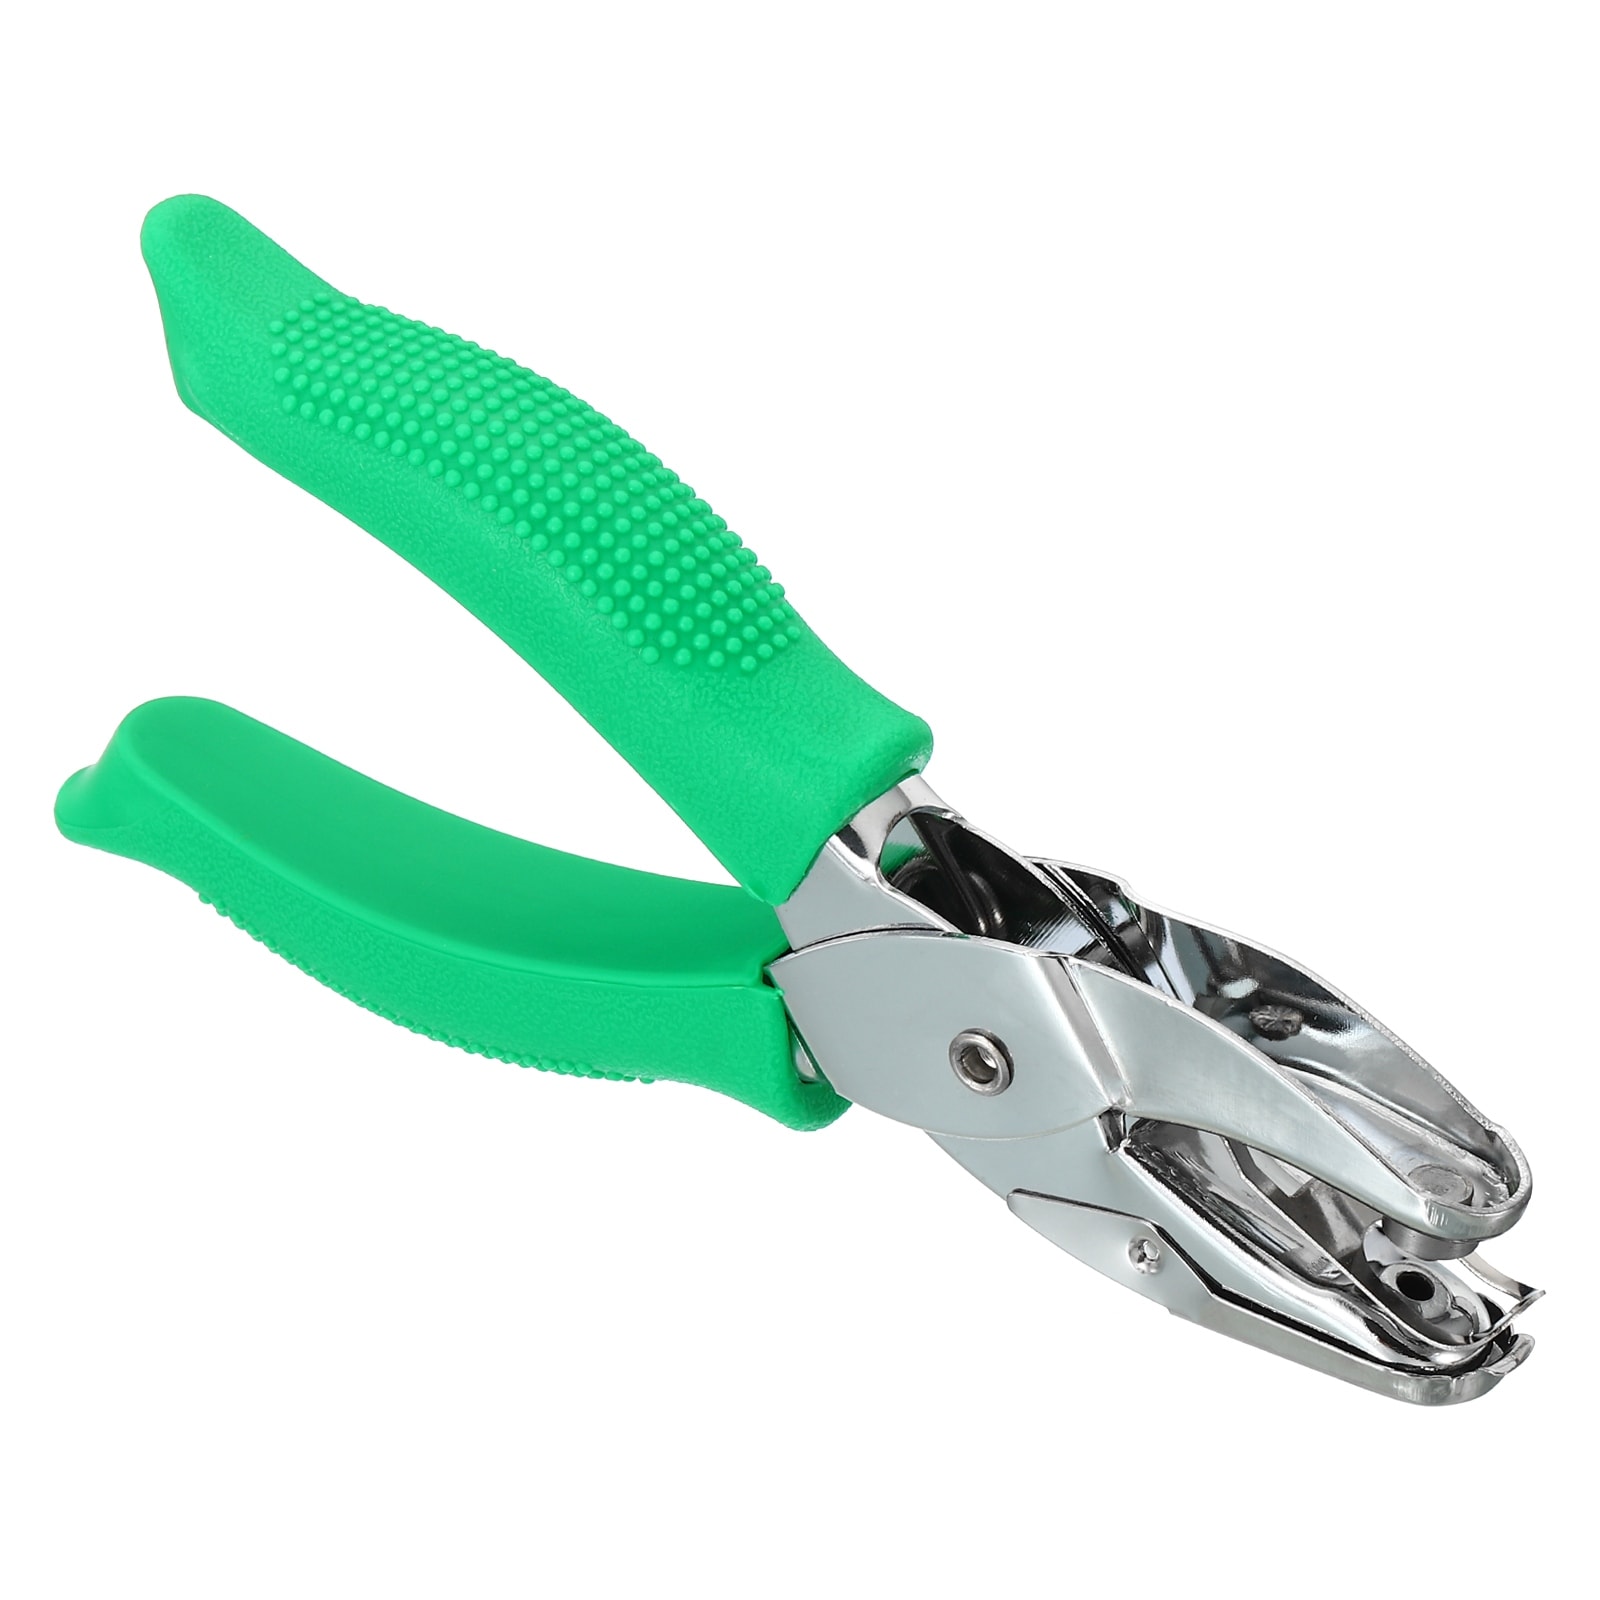 1/8 Single Hole Punch Handheld Hole Puncher with Soft Grip Circle Shape,  Green - Bed Bath & Beyond - 37683253